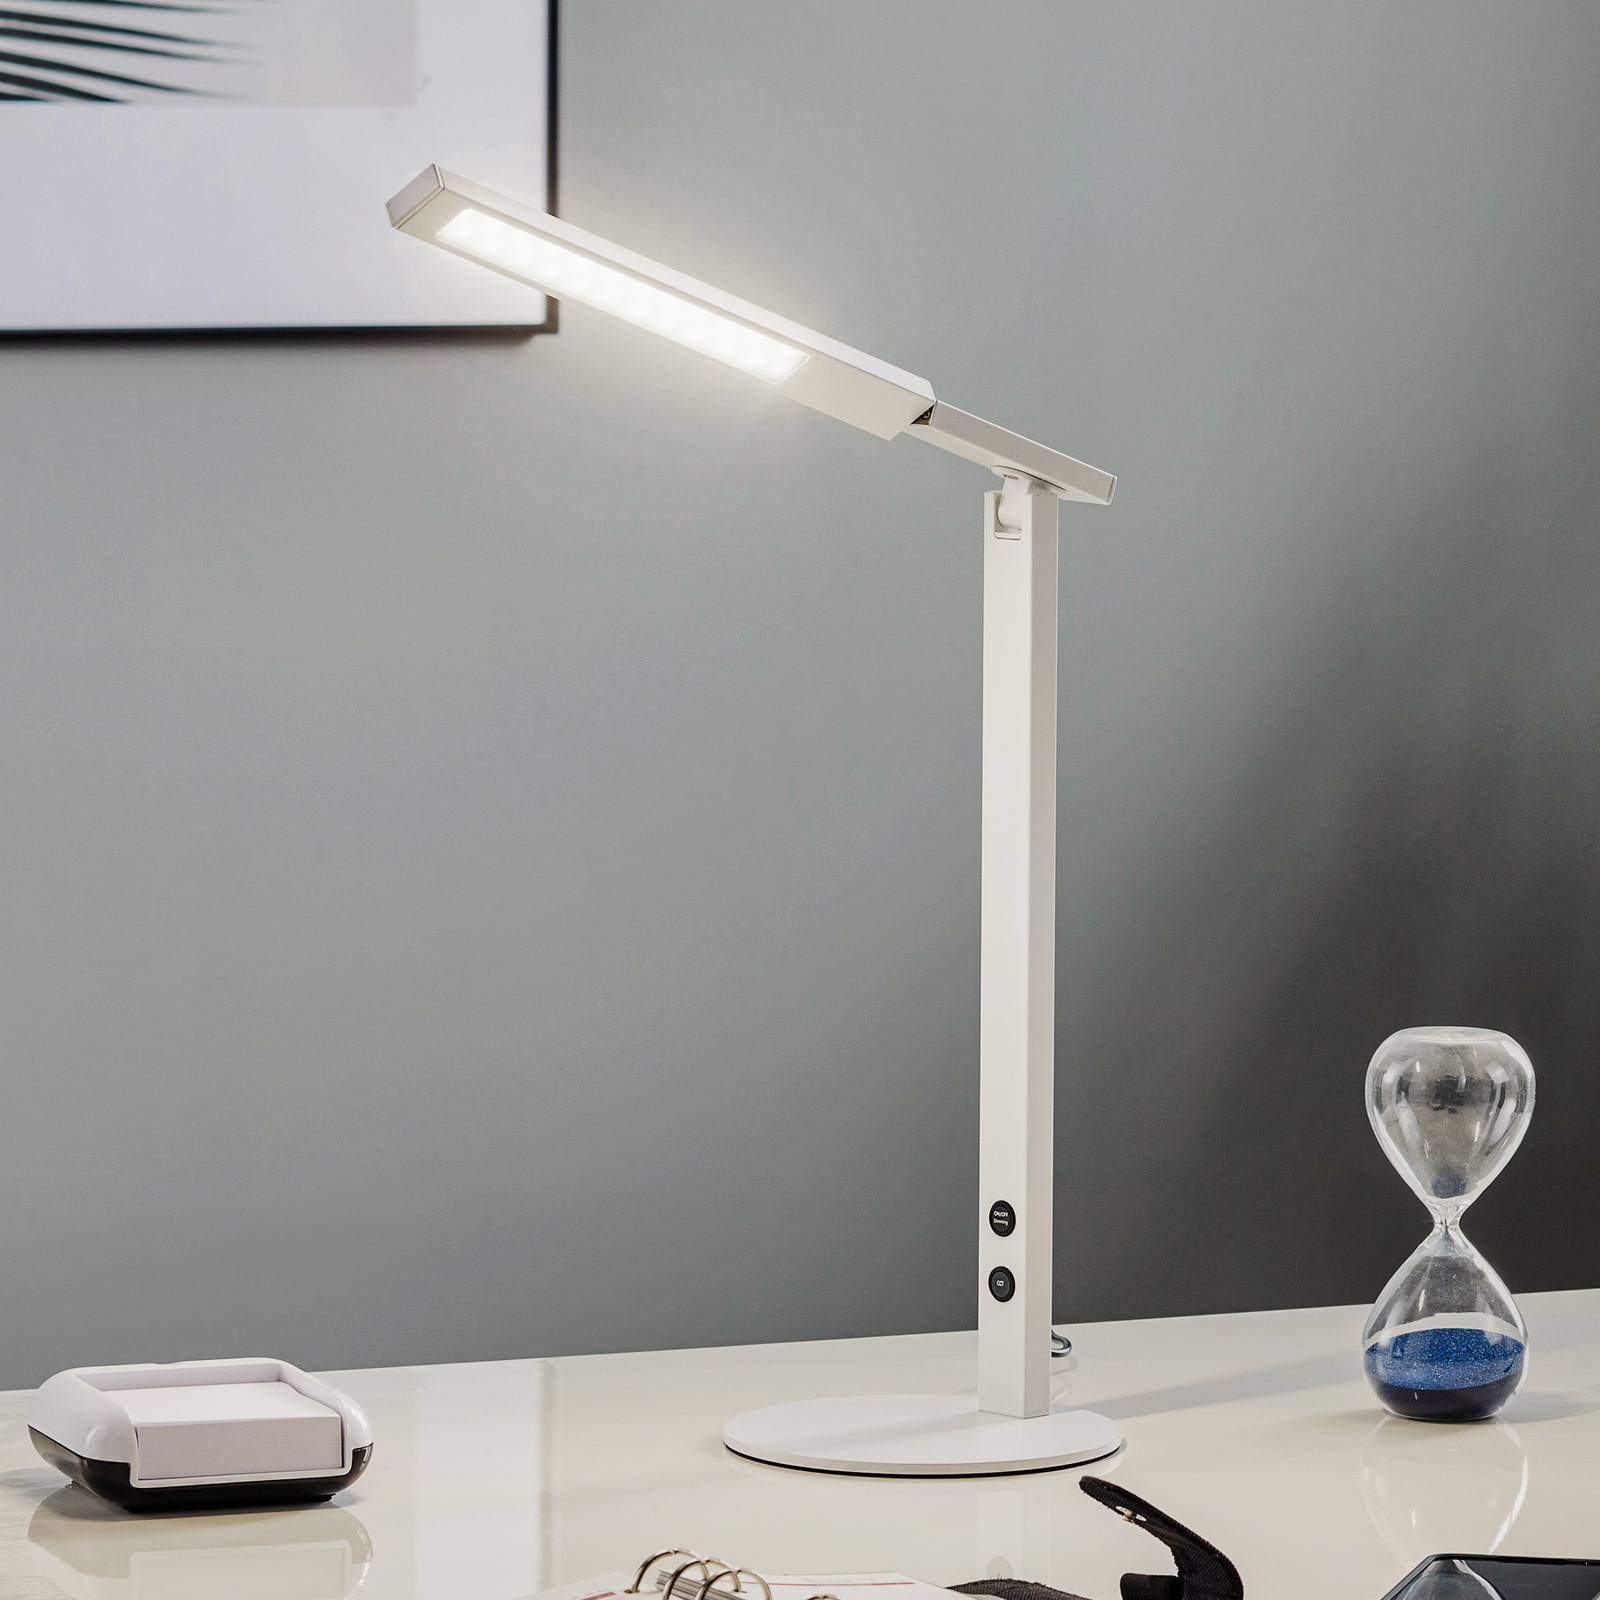 Ideal LED desk lamp with a dimmer, white